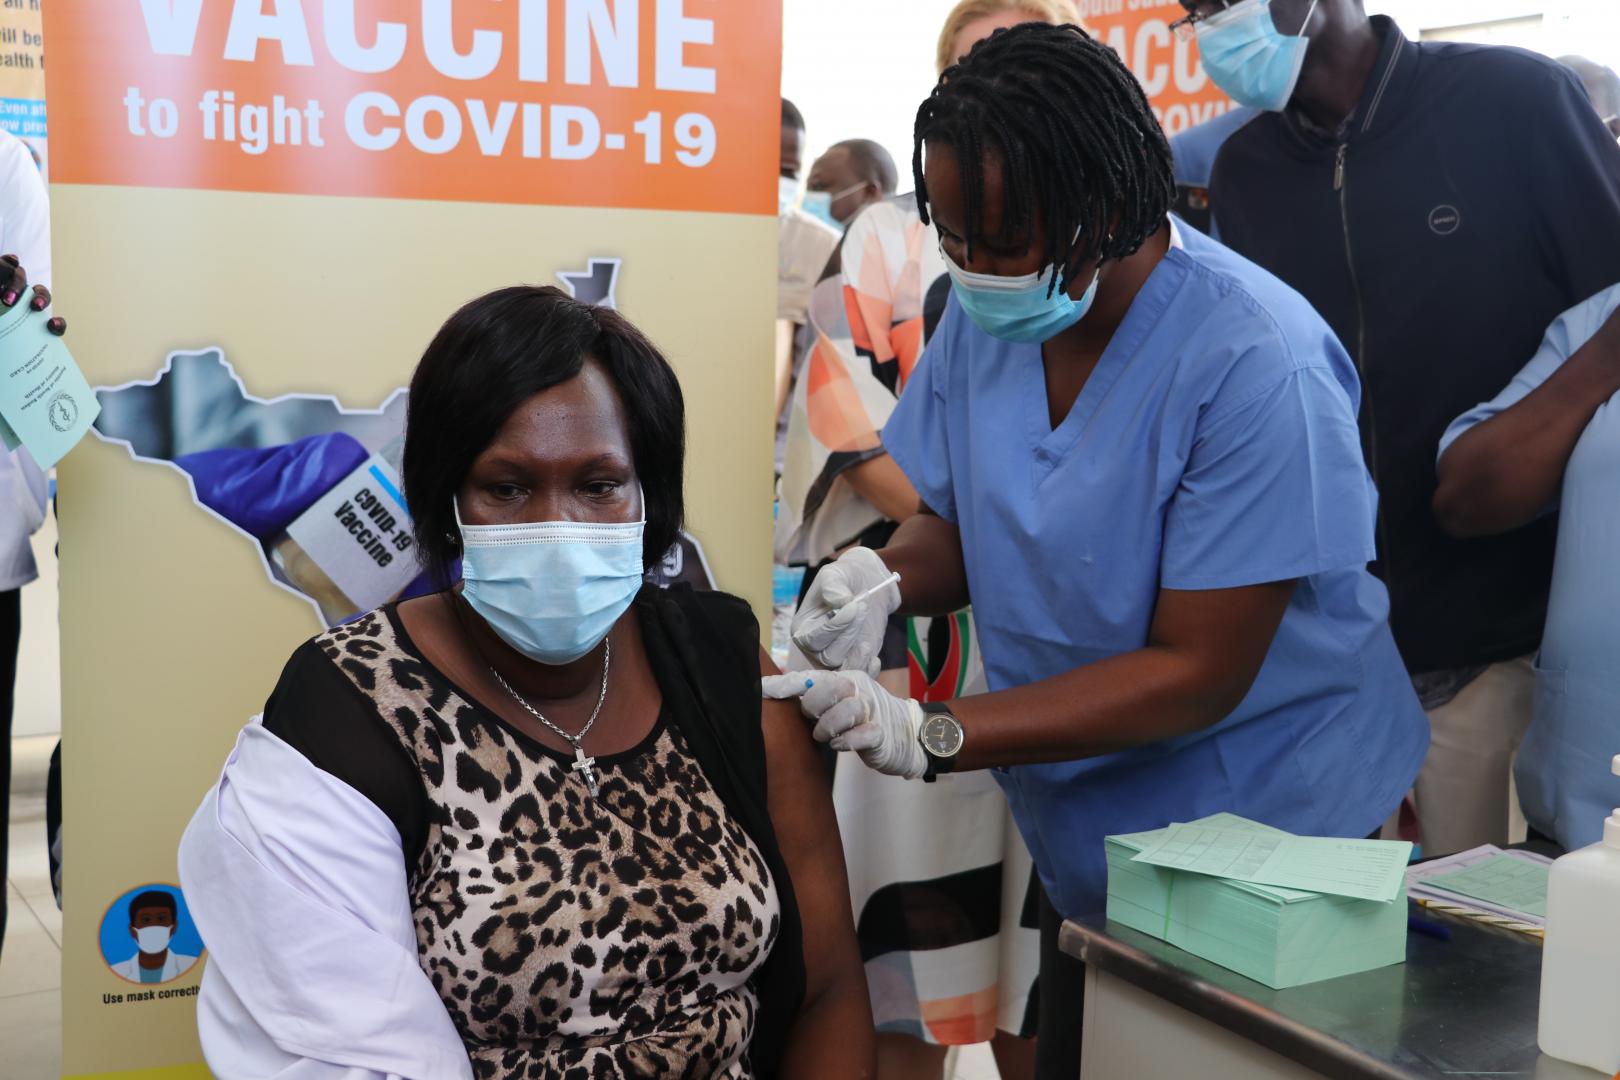 The first person in the country to be vaccinated against the virus was the Hon. Minister of Health Elizabeth Achuei